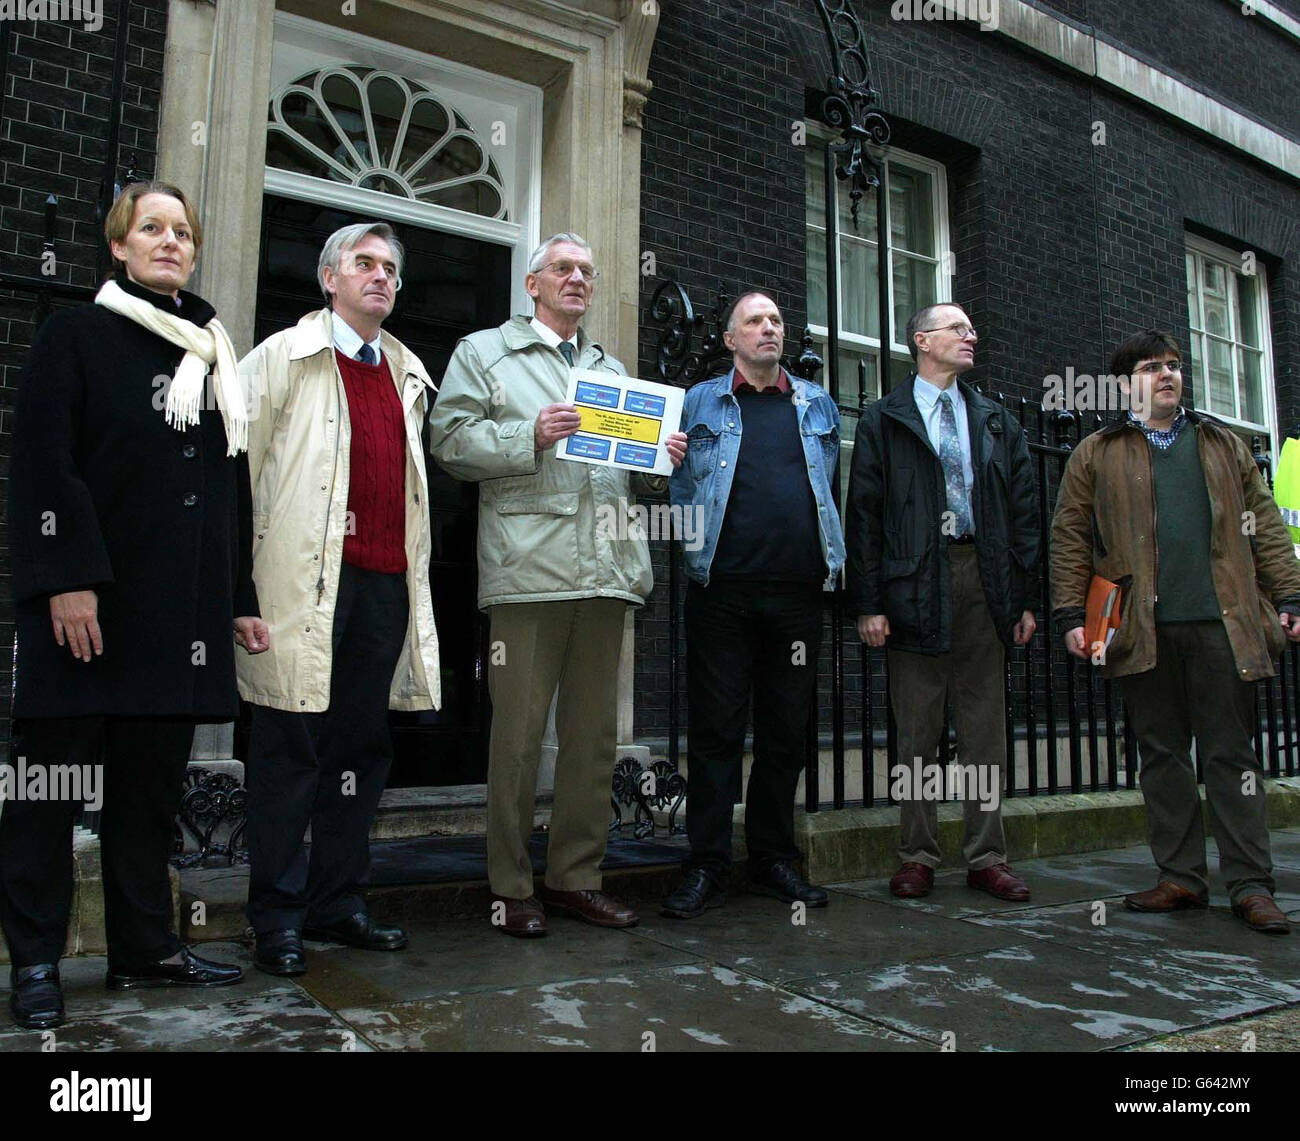 (From L-R) Carol Barbone of Stop Stansted Expansion, John McDonnell Labour MP of Heathrow, Norman Mead, Chairman of Stop Stansted Airport Campaign, John Stewart Chairman Heathrow HACAN, Roger Wood Committee member of LADACAN Luton and James Drewer. * ... also of Stop Stansted Expansion, standing outside no.10 Downing Street, central London, with their petition to hand into the Prime Minister, against the expansion of Stansted airport in Essex. Hundreds of protesters earlier marched through London to demonstrate against airport expansion in the UK. Adding an extra three runways at Stansted Stock Photo